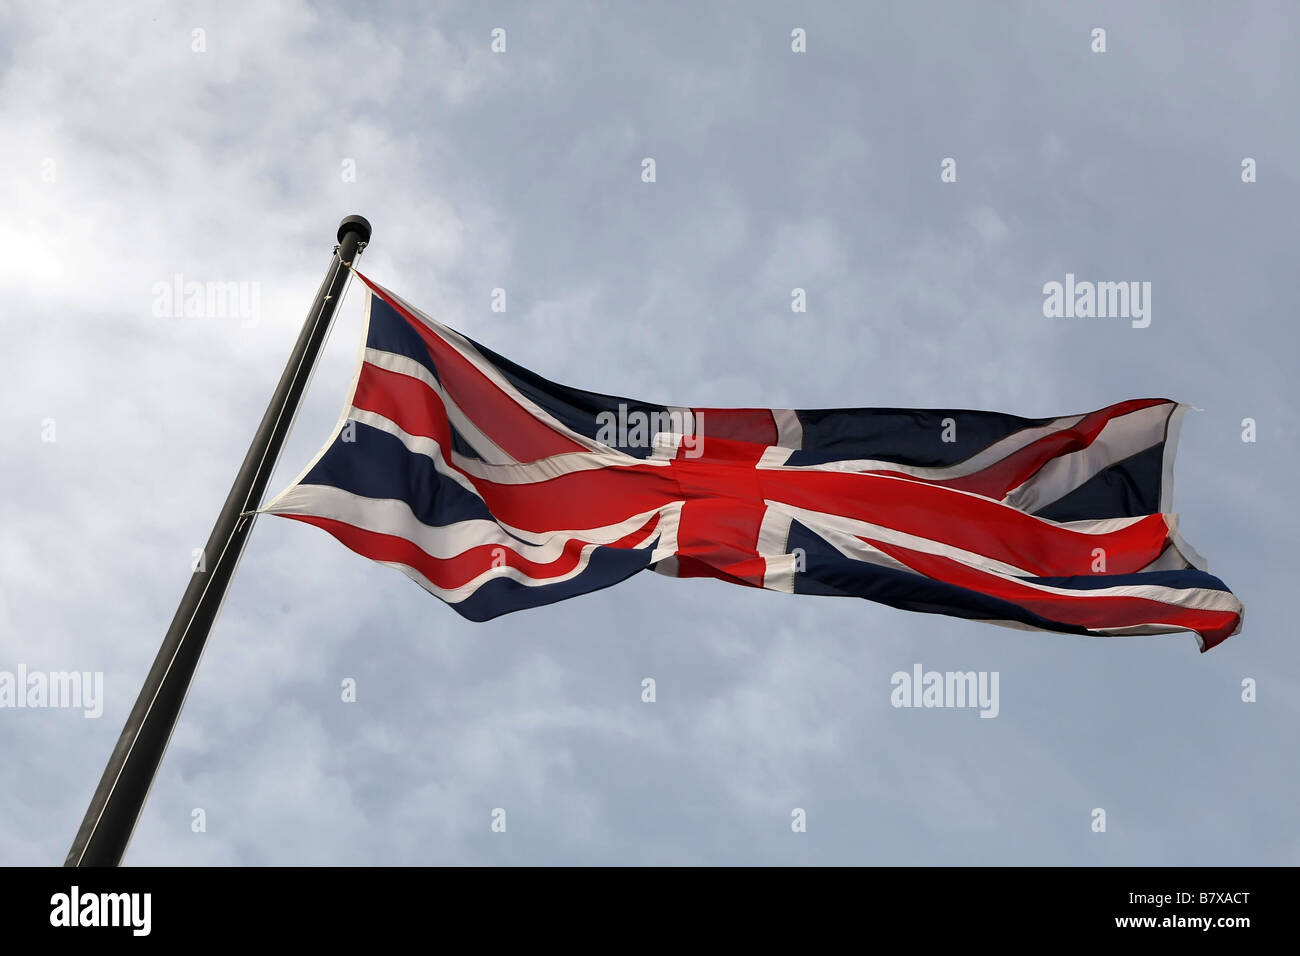 The Union Jack (flag), the flag of the United Kingdom, fully flying against a blue sky with some slight cloud. Stock Photo